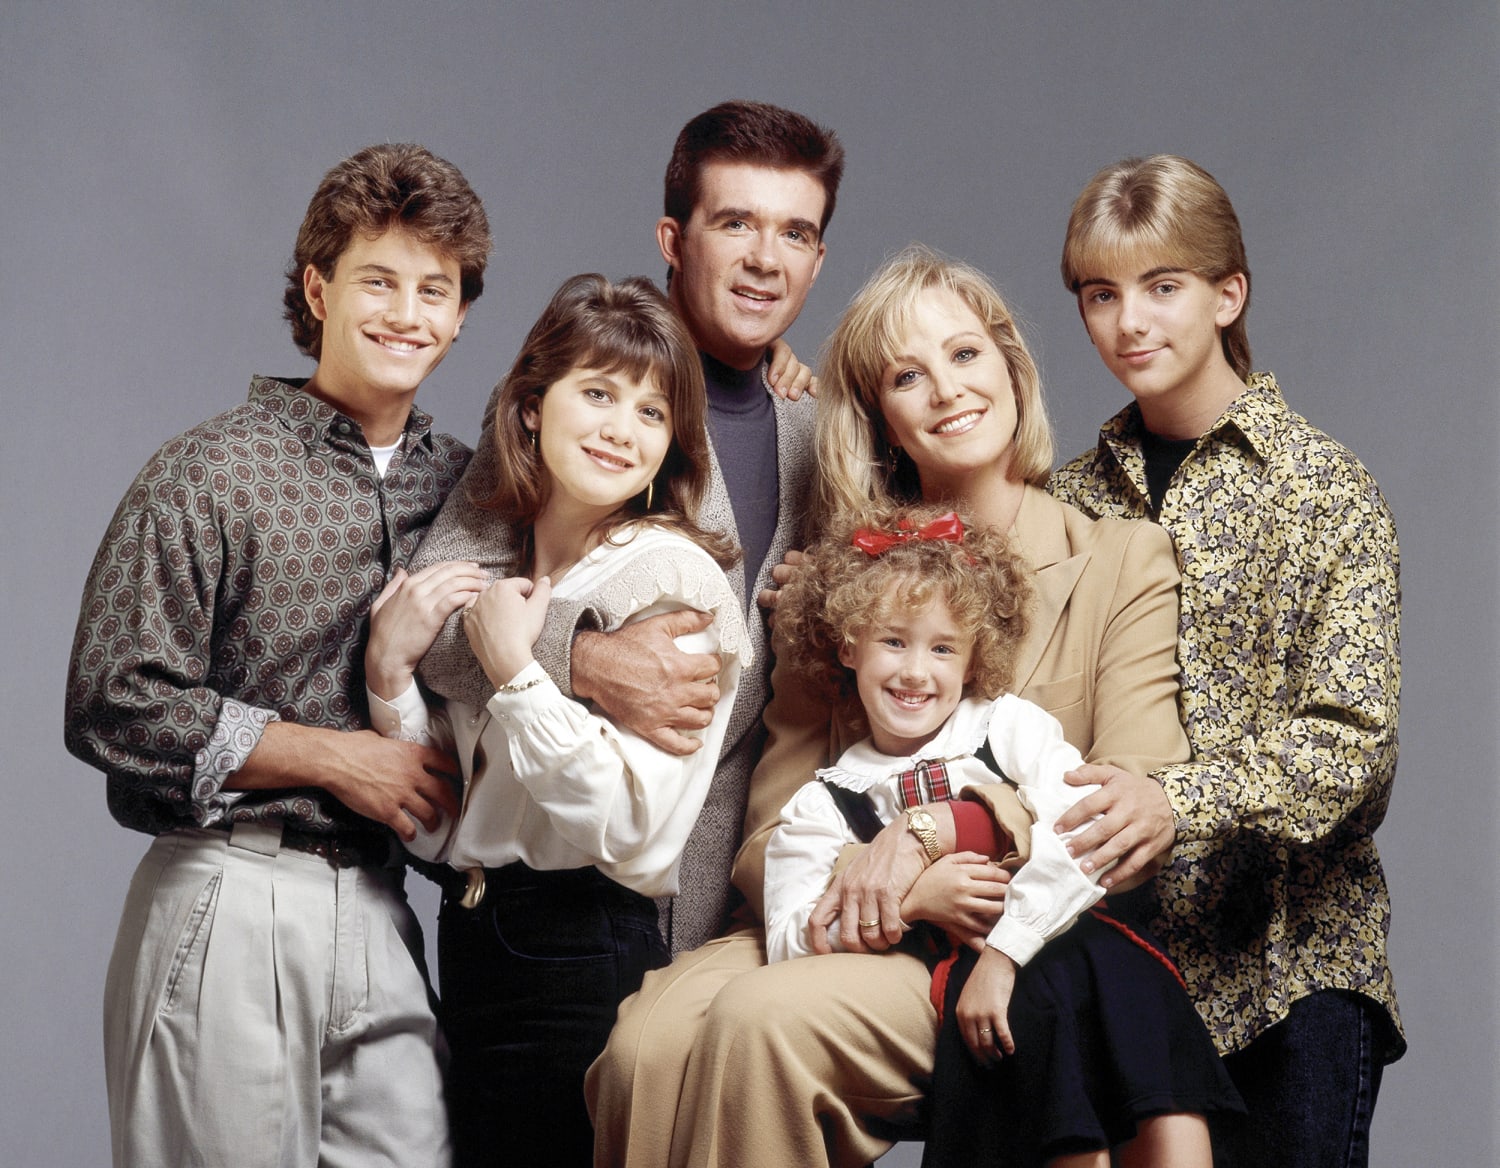 Growing Pains' star Ashley Johnson on working with Alan Thicke: 'I